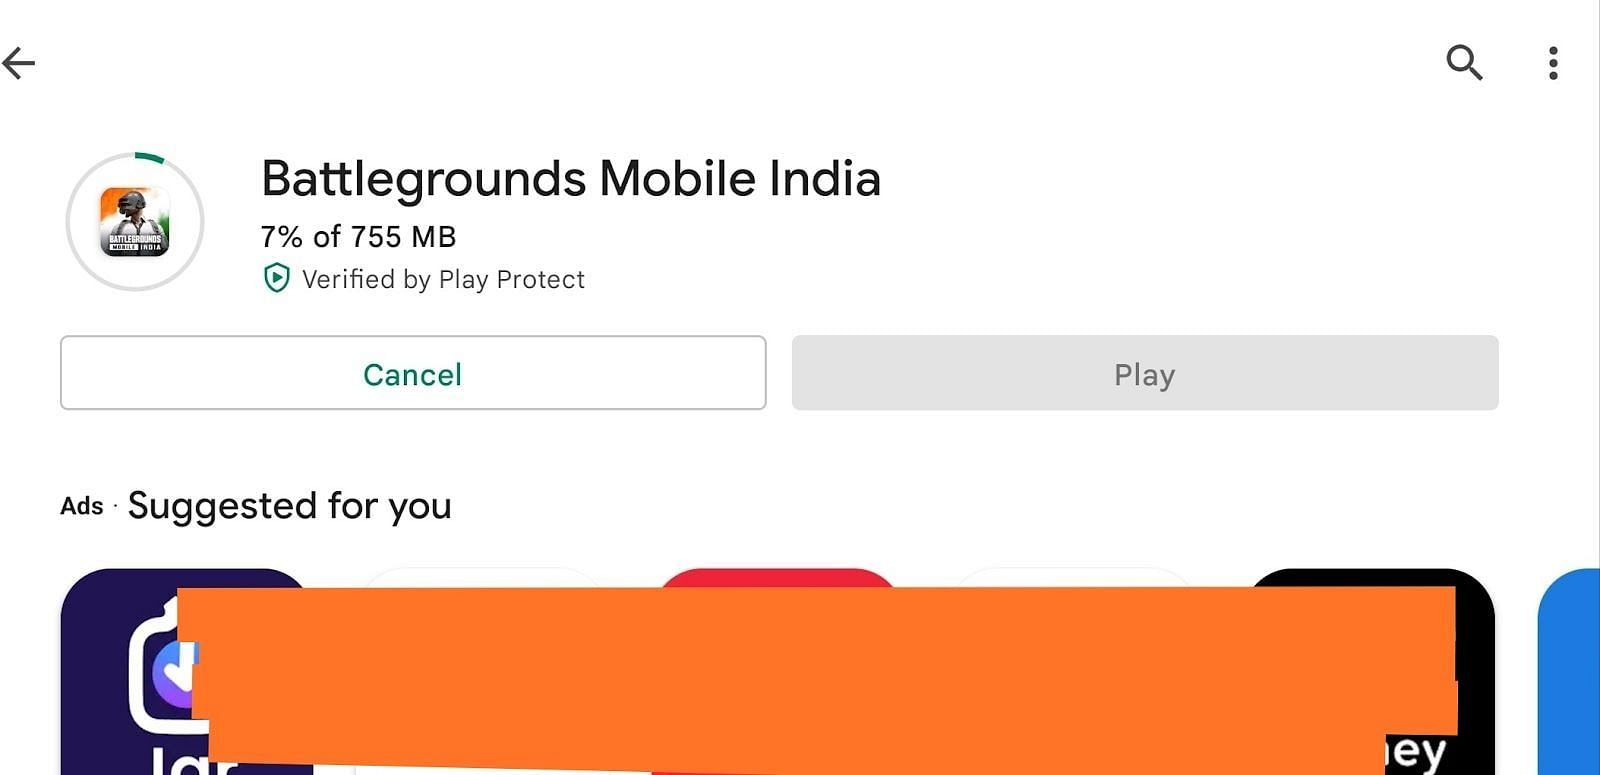 Battlegrounds Mobile India has a download size of 755 MB (Image via Google Play Store)